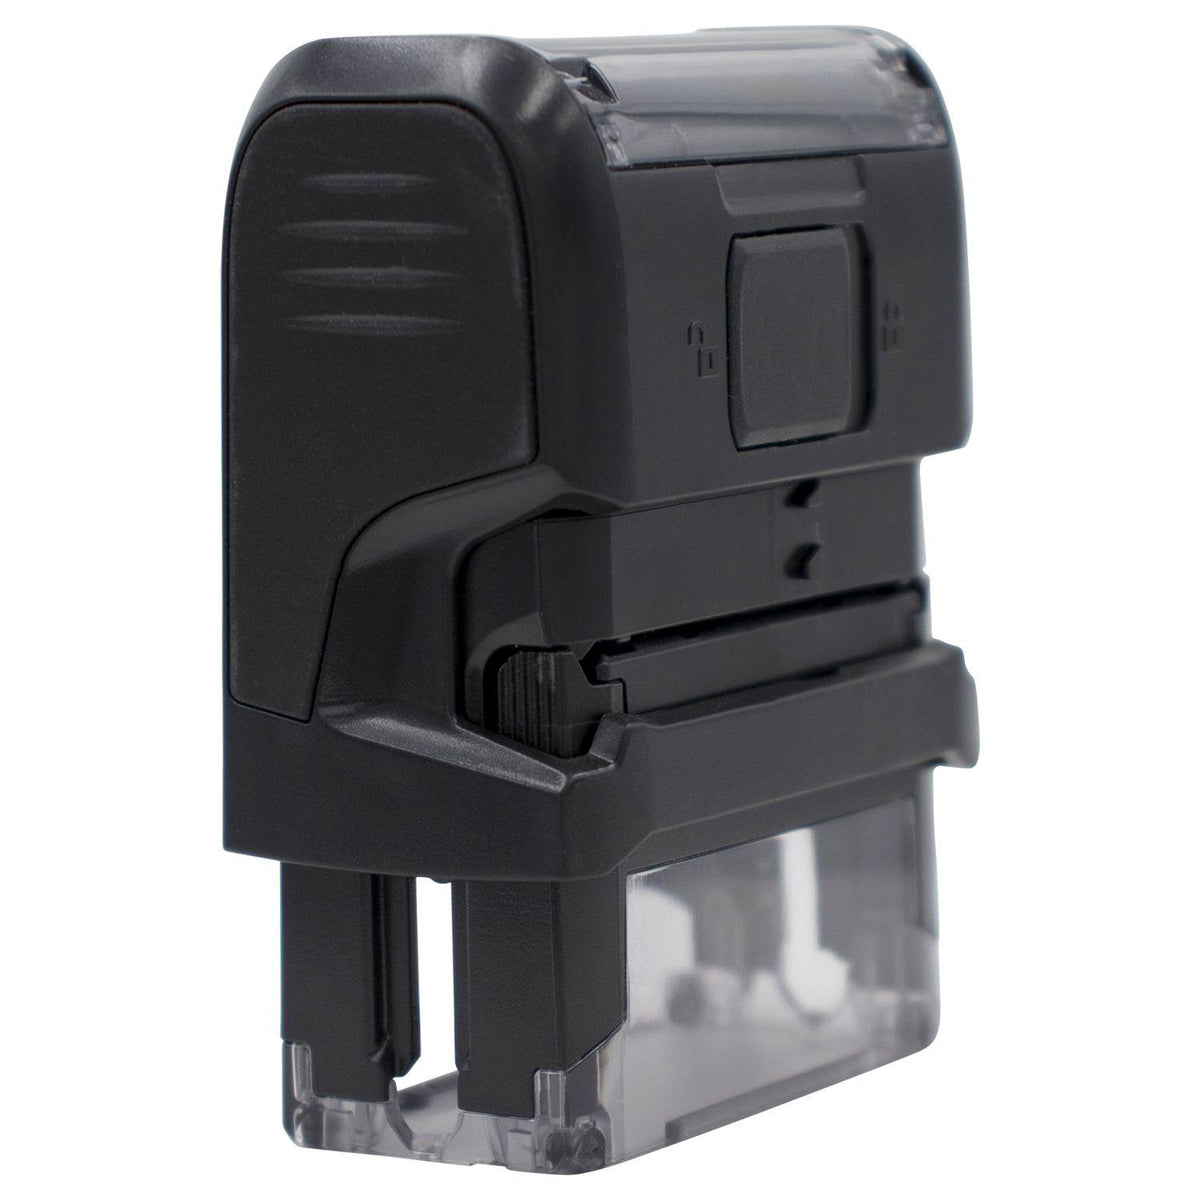 Self Inking Atm Stamp - Engineer Seal Stamps - Brand_Trodat, Impression Size_Small, Stamp Type_Self-Inking Stamp, Type of Use_Finance